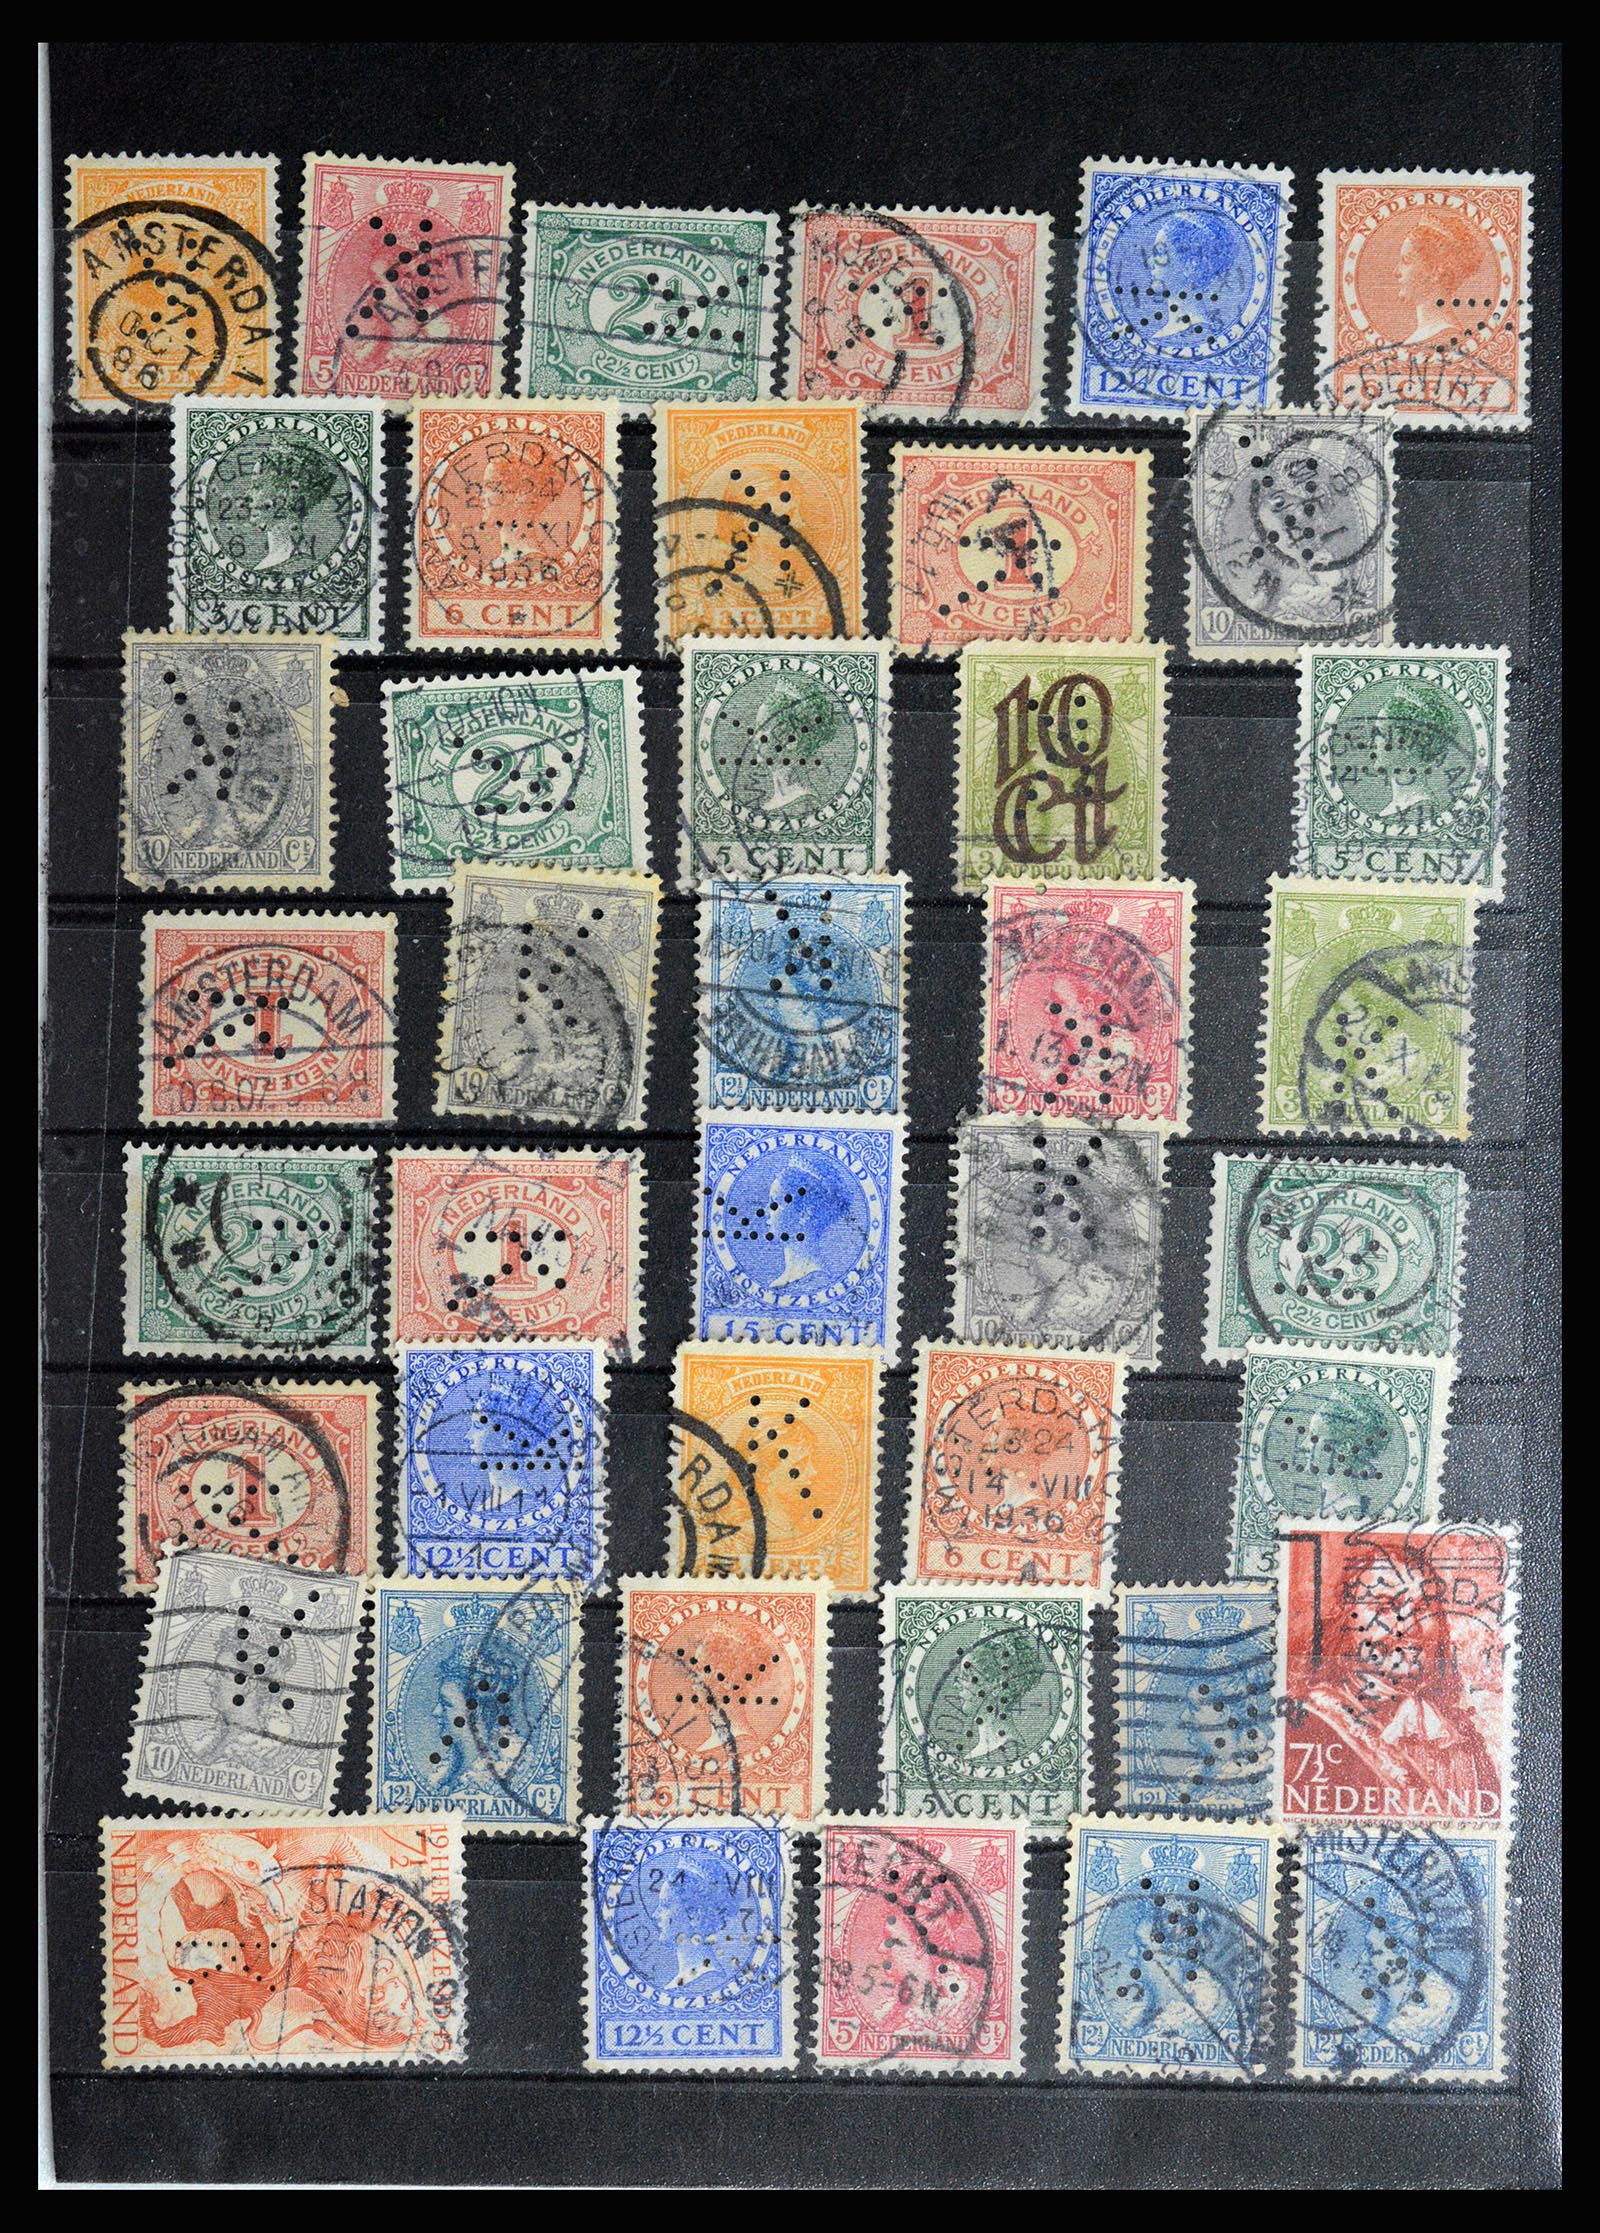 36849 010 - Stamp collection 36849 Netherlands perfins 1891-1960.